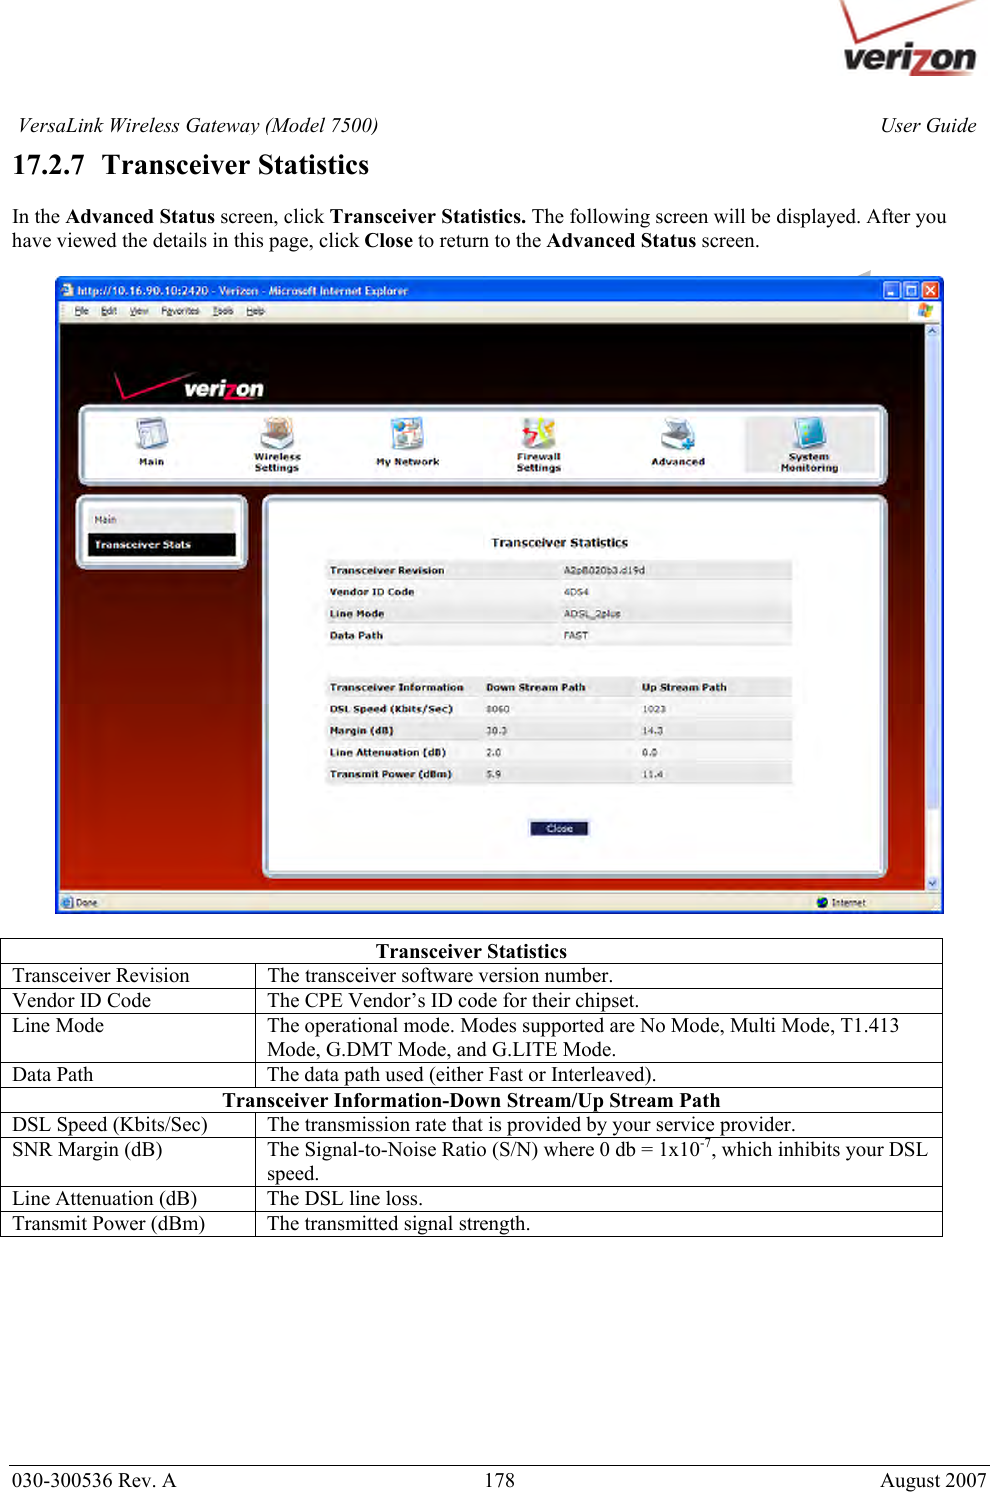       030-300536 Rev. A  178     August 2007 User GuideVersaLink Wireless Gateway (Model 7500)17.2.7   Transceiver Statistics  In the Advanced Status screen, click Transceiver Statistics. The following screen will be displayed. After you have viewed the details in this page, click Close to return to the Advanced Status screen.    Transceiver Statistics Transceiver Revision  The transceiver software version number. Vendor ID Code  The CPE Vendor’s ID code for their chipset. Line Mode  The operational mode. Modes supported are No Mode, Multi Mode, T1.413 Mode, G.DMT Mode, and G.LITE Mode. Data Path  The data path used (either Fast or Interleaved). Transceiver Information-Down Stream/Up Stream Path DSL Speed (Kbits/Sec)  The transmission rate that is provided by your service provider. SNR Margin (dB)  The Signal-to-Noise Ratio (S/N) where 0 db = 1x10-7, which inhibits your DSL speed. Line Attenuation (dB)  The DSL line loss. Transmit Power (dBm)  The transmitted signal strength.   